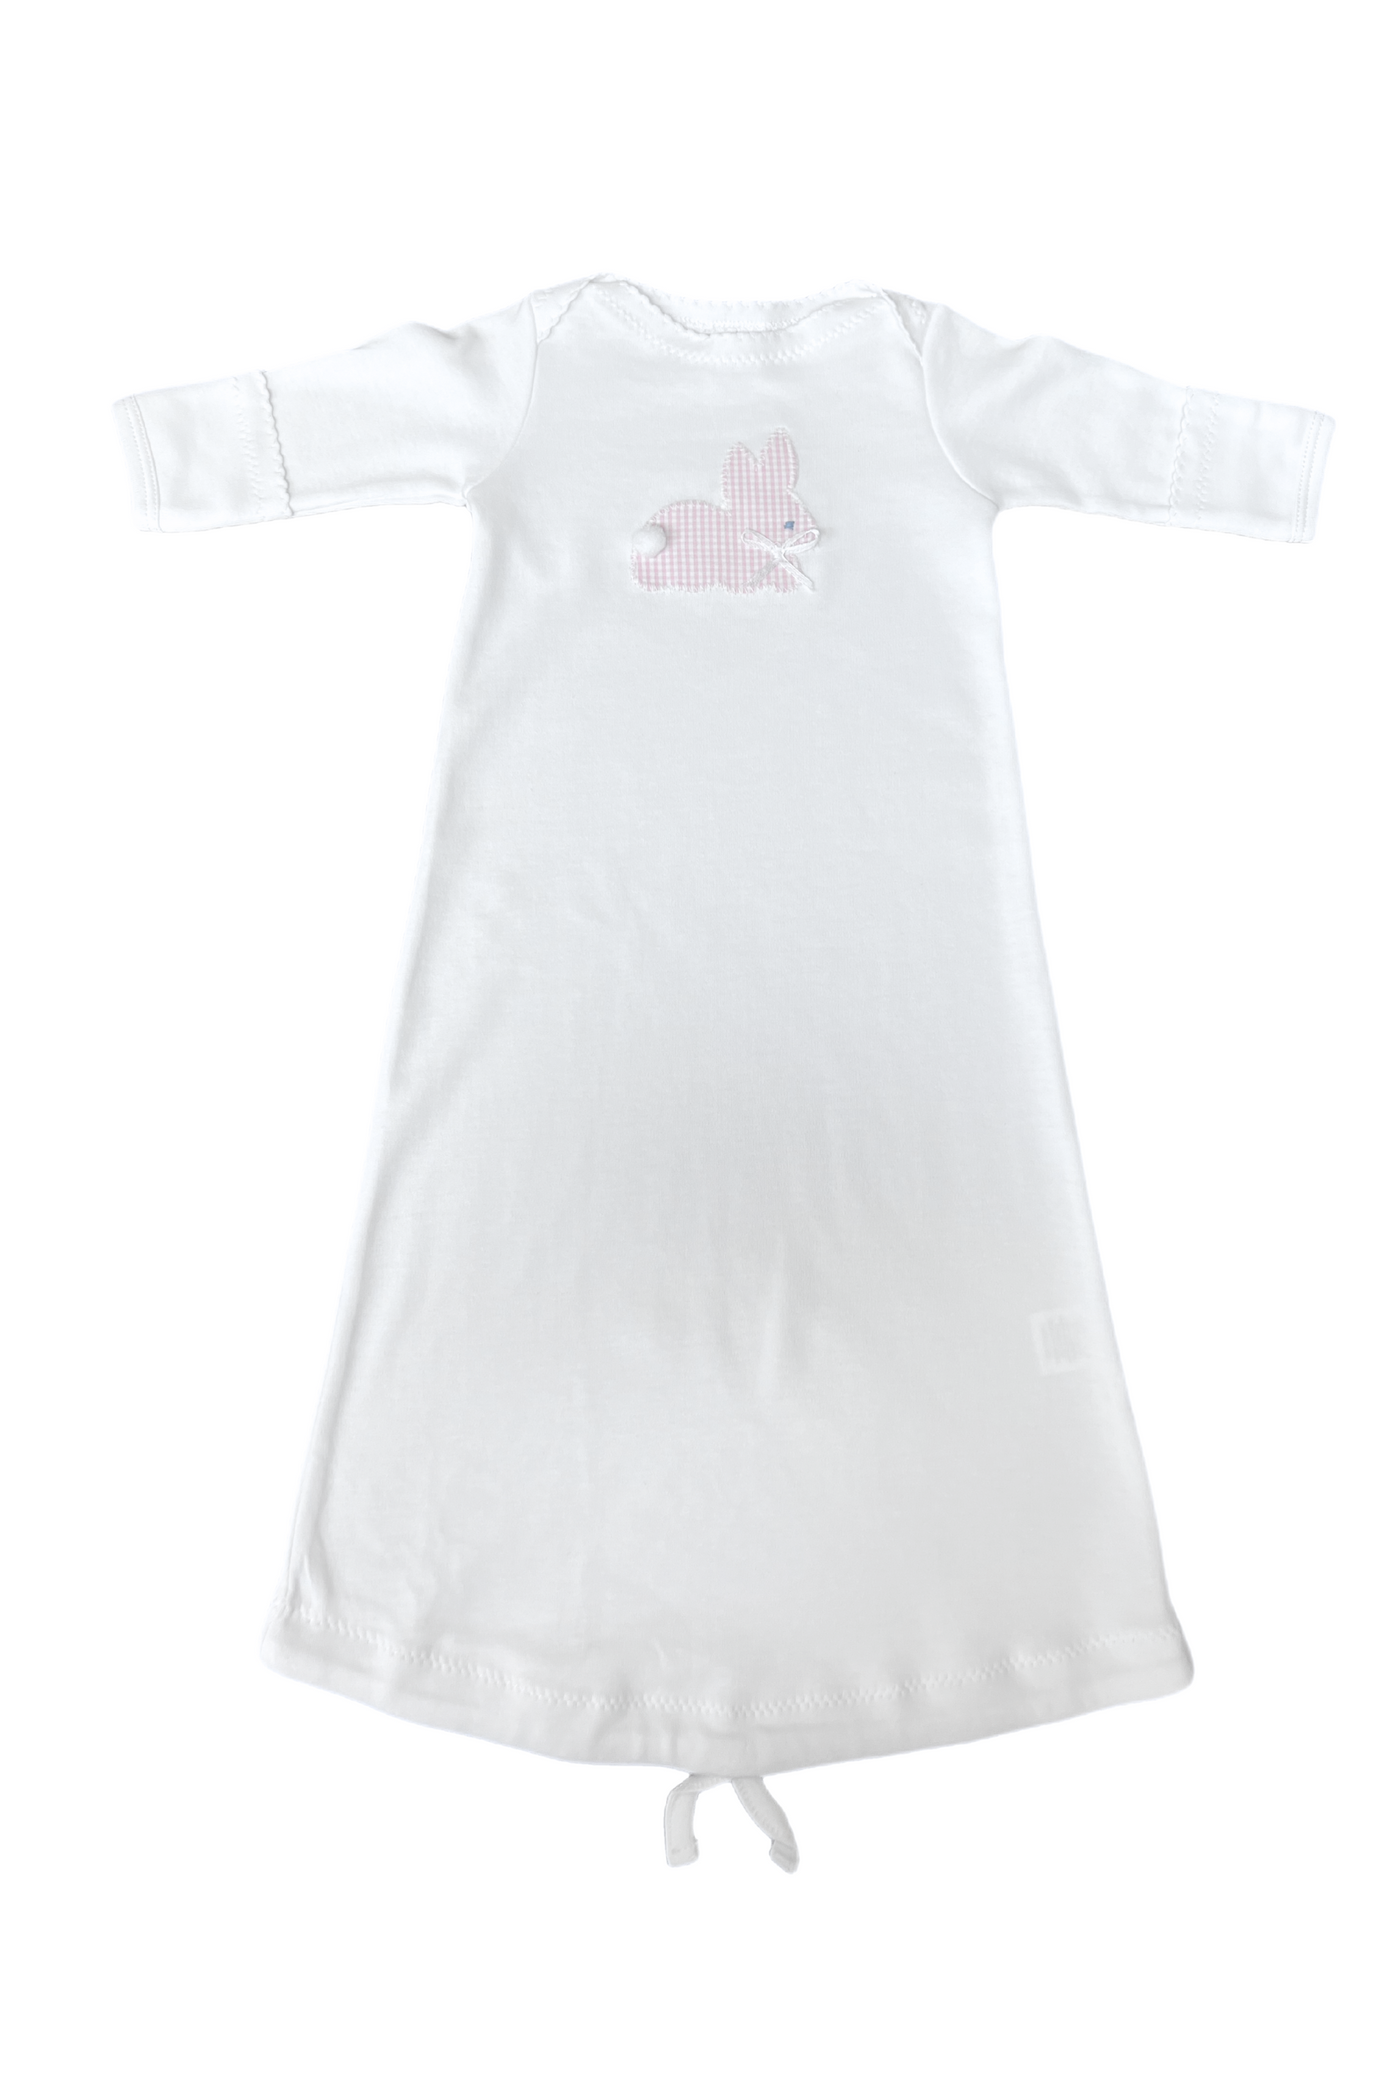 JJ Applique Day Gown Pink Check Bunny